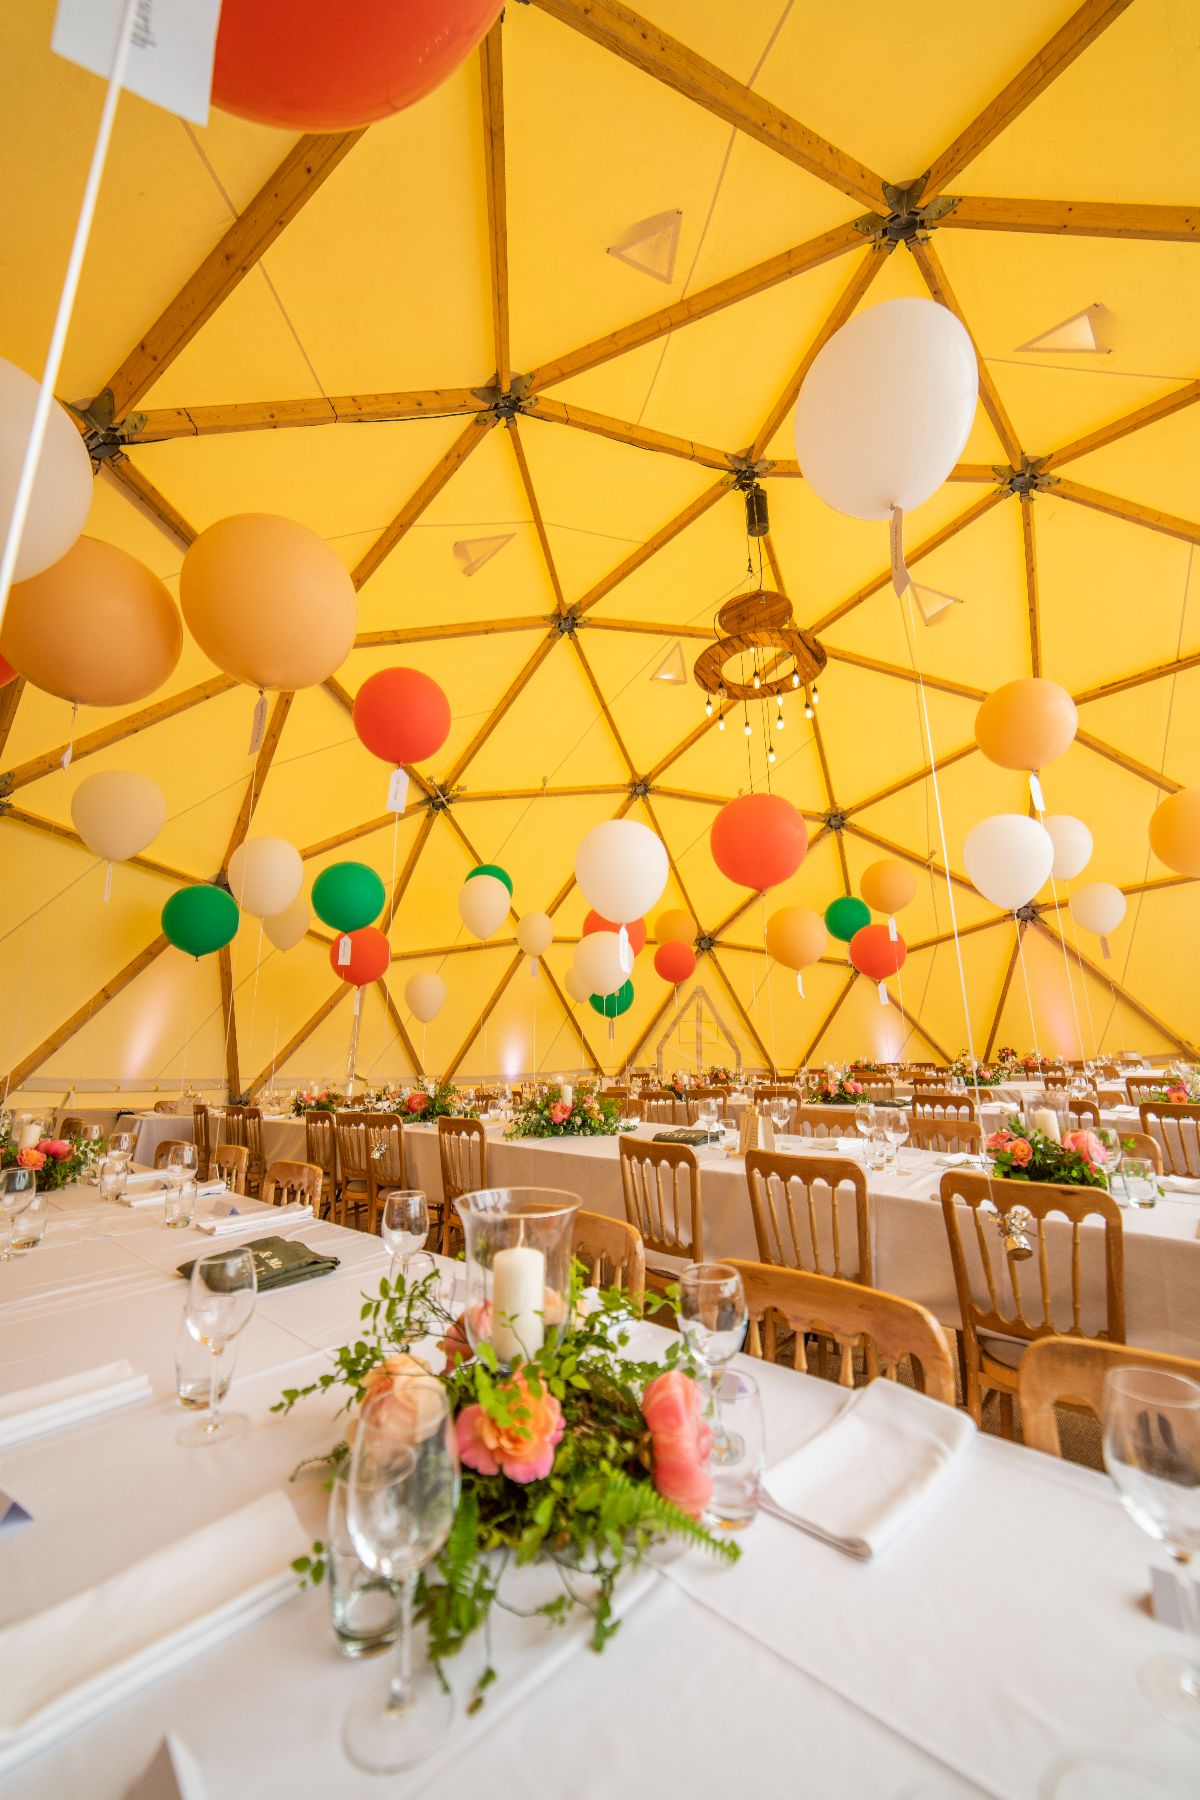 Gallery Item 11 for Event In A Tent